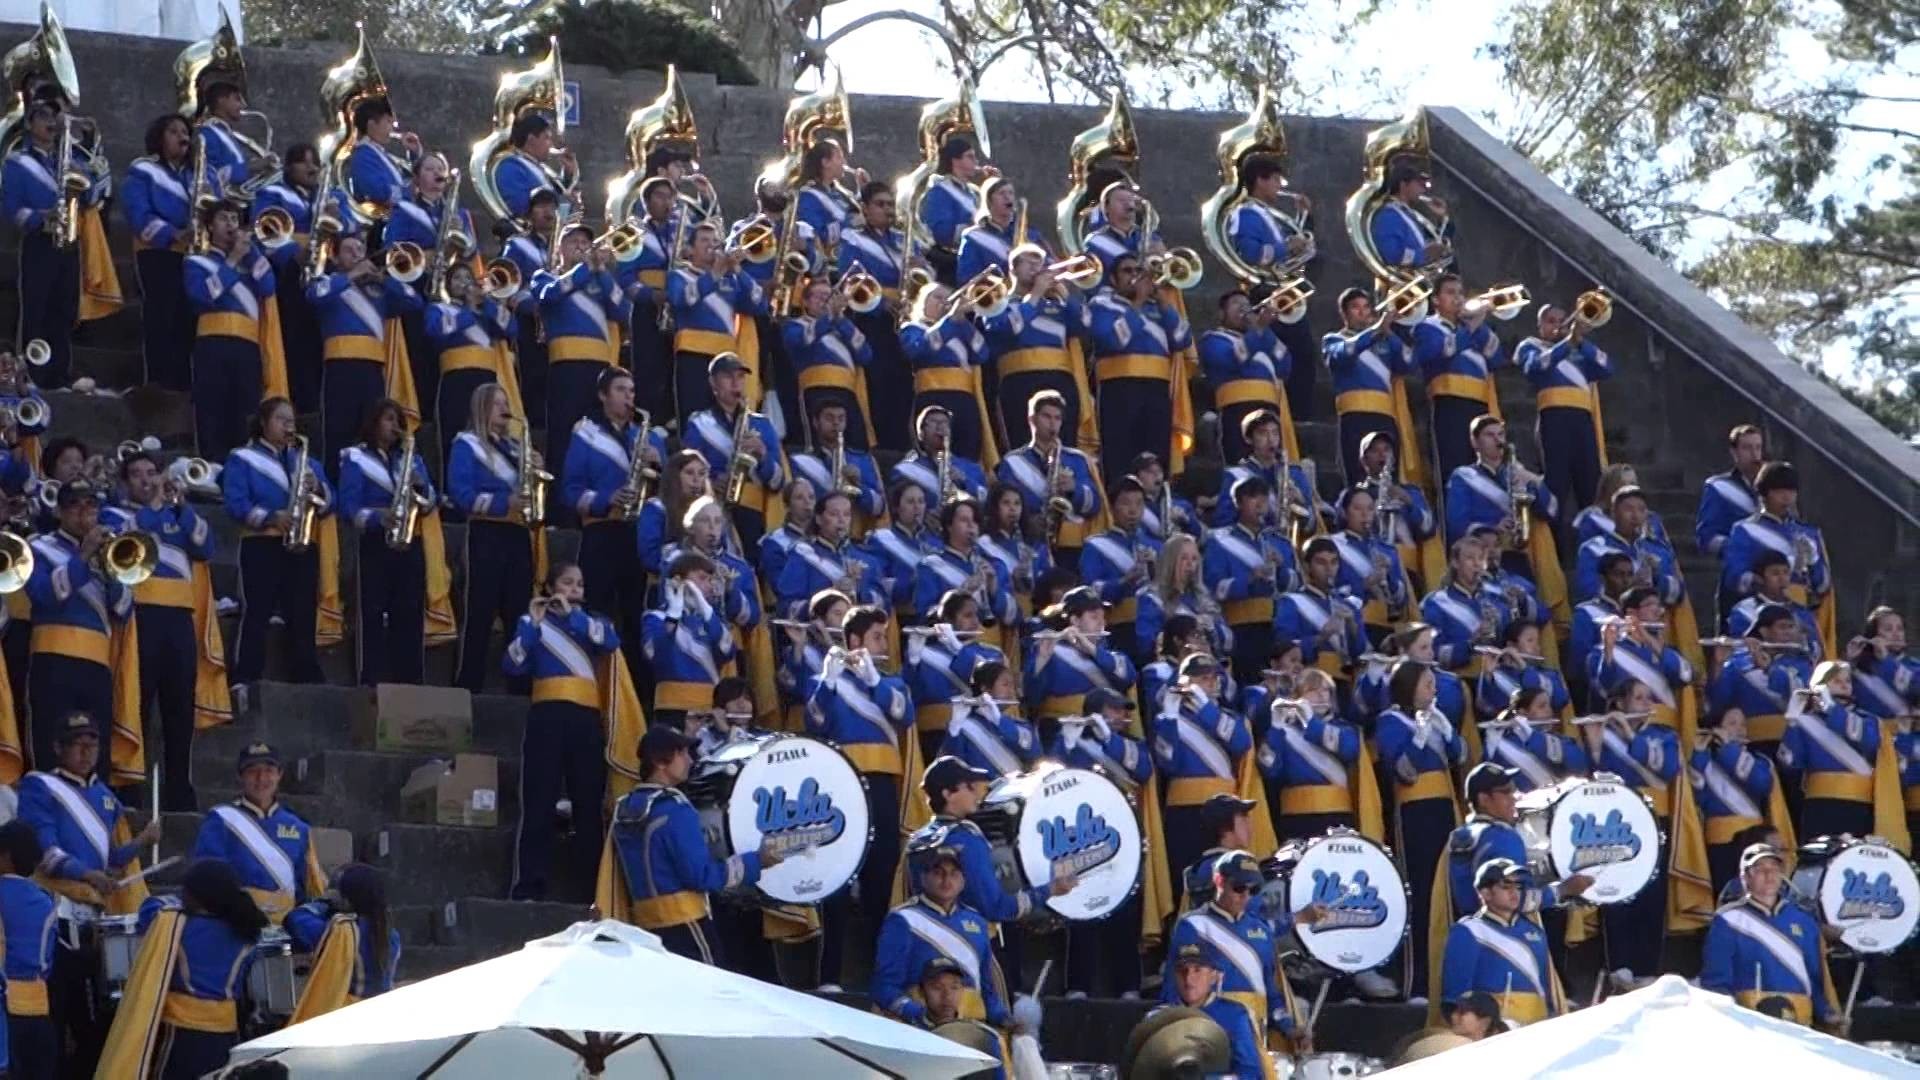 1920x1080 UCLA Marching Band Pre-Game performance at Bruin Bash October 18, 2014  Video 1 - YouTube